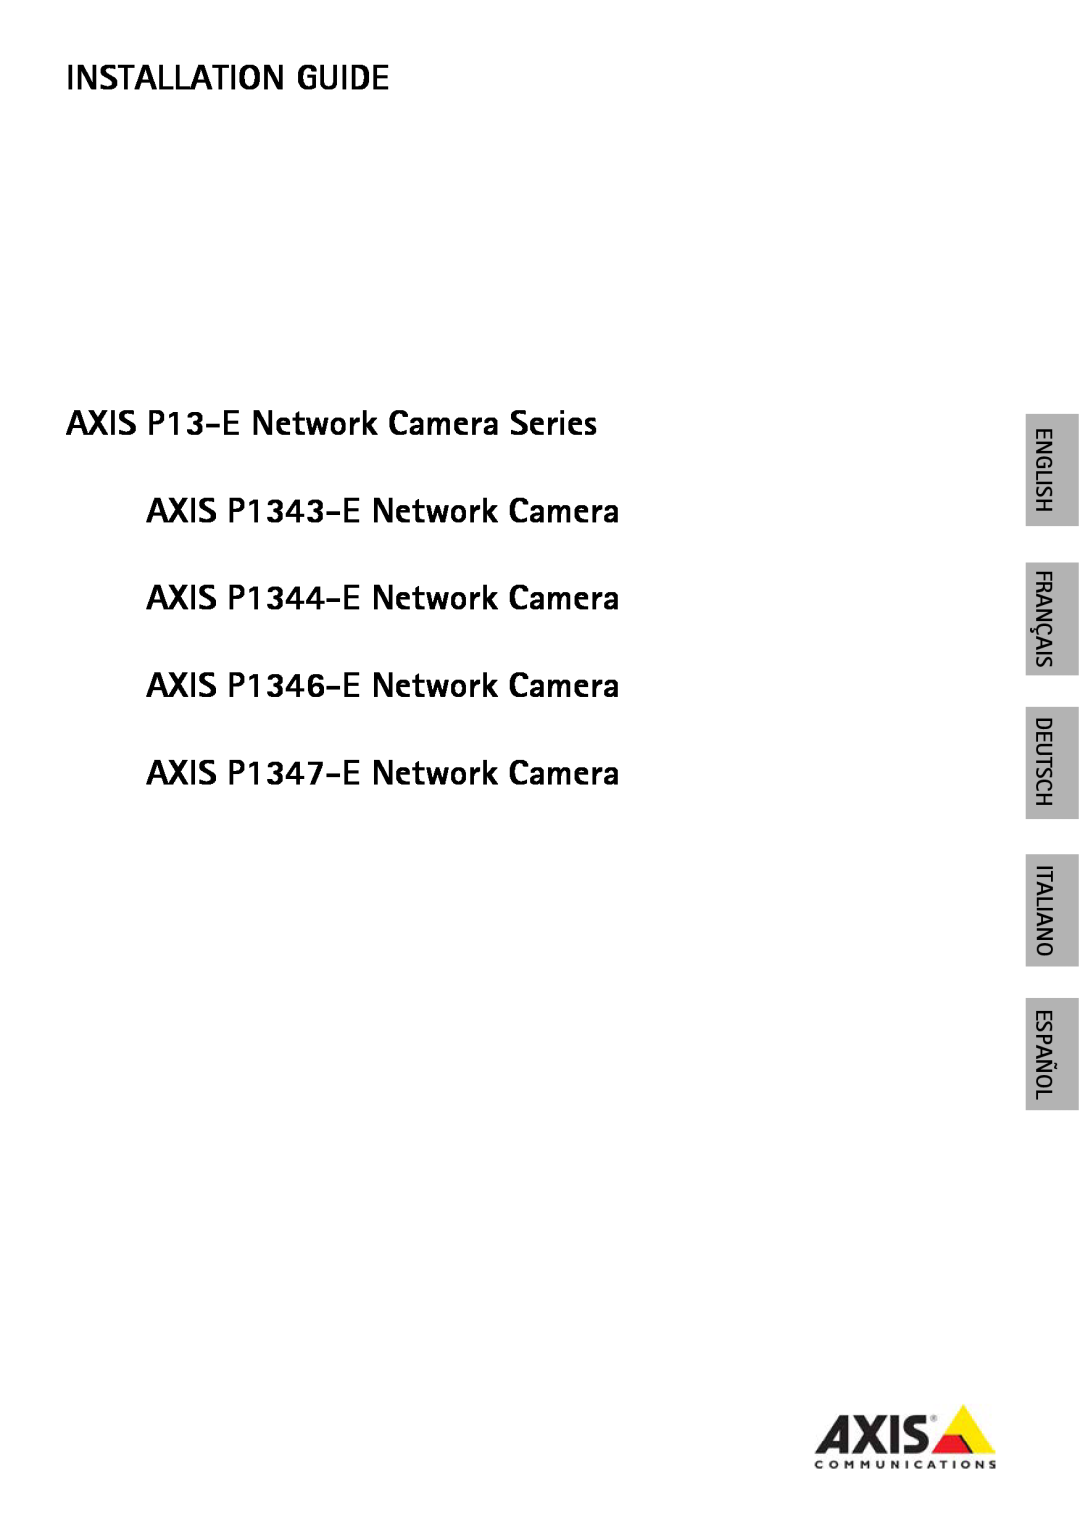 Axis Communications P1347-E manual Installation Guide, AXIS P13-ENetwork Camera Series, AXIS P1343-ENetwork Camera 